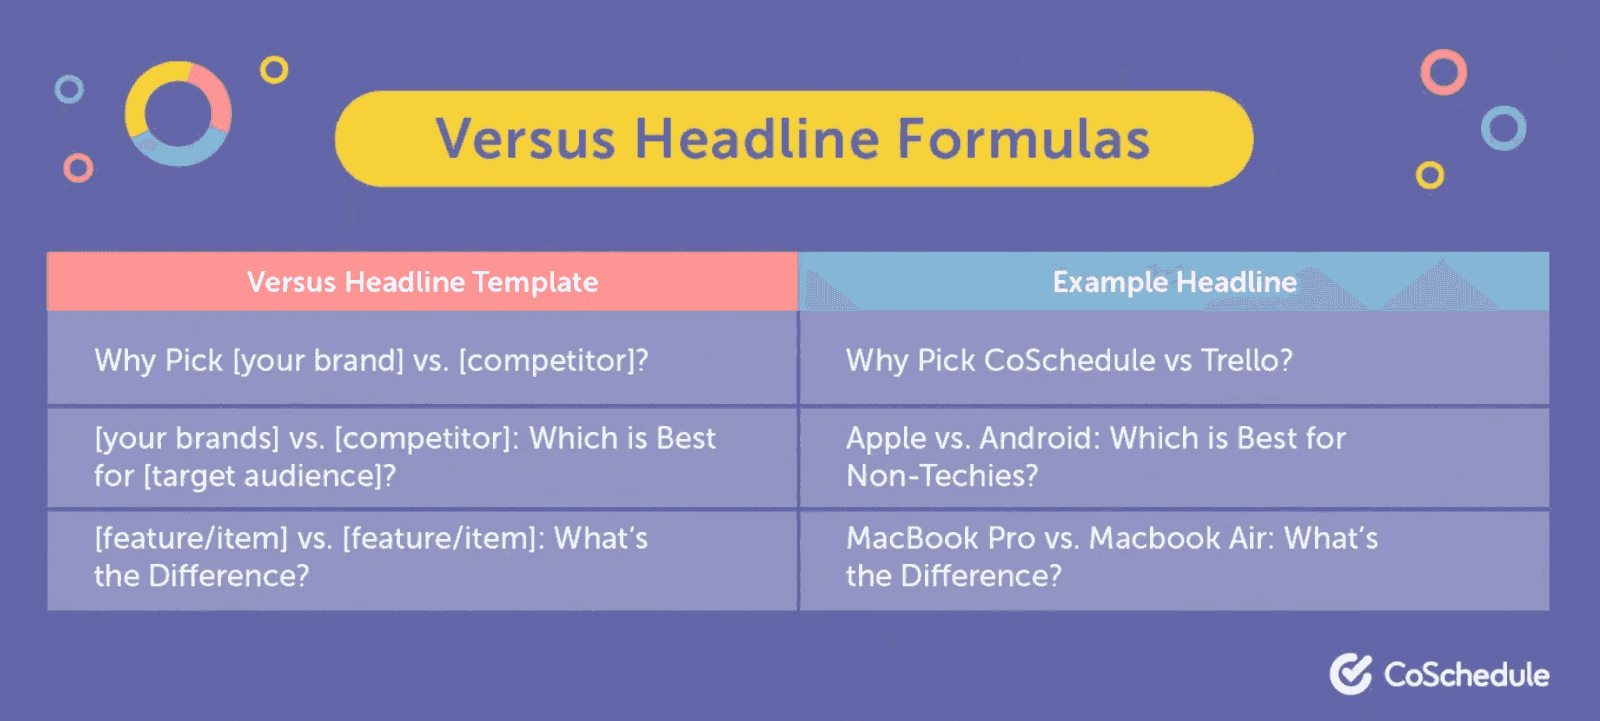 Template for using different forms of versus headlines